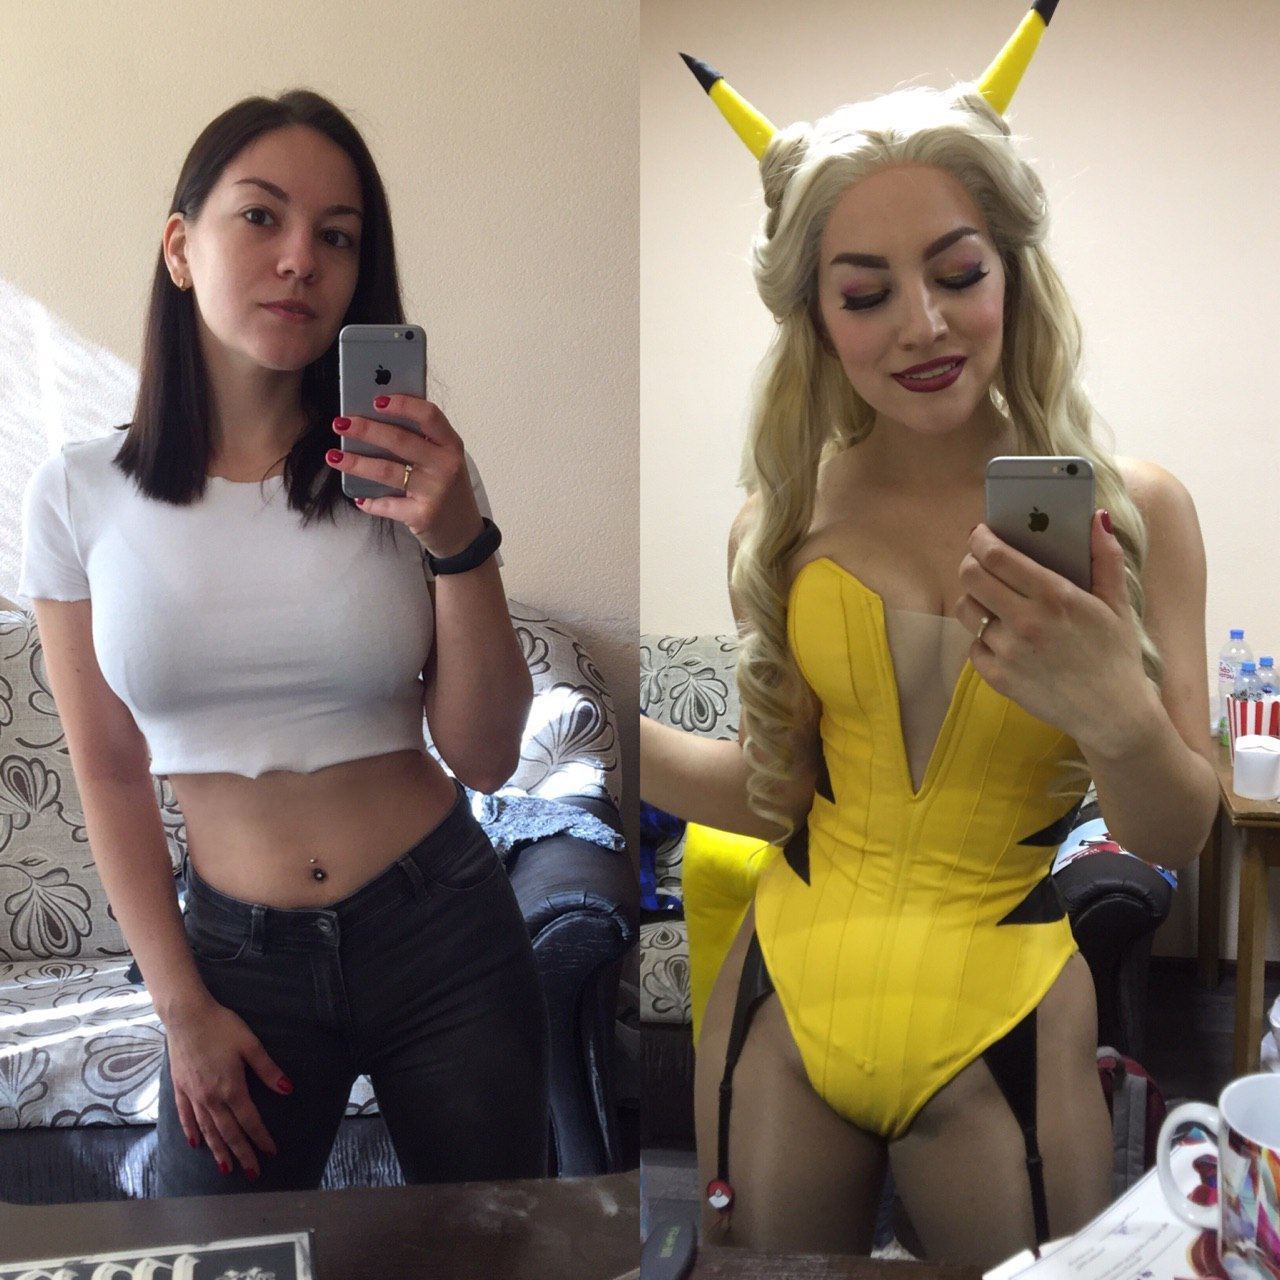 Pikachu From Pokemon In And Out Of Cosplay By Zoe Volf Sel